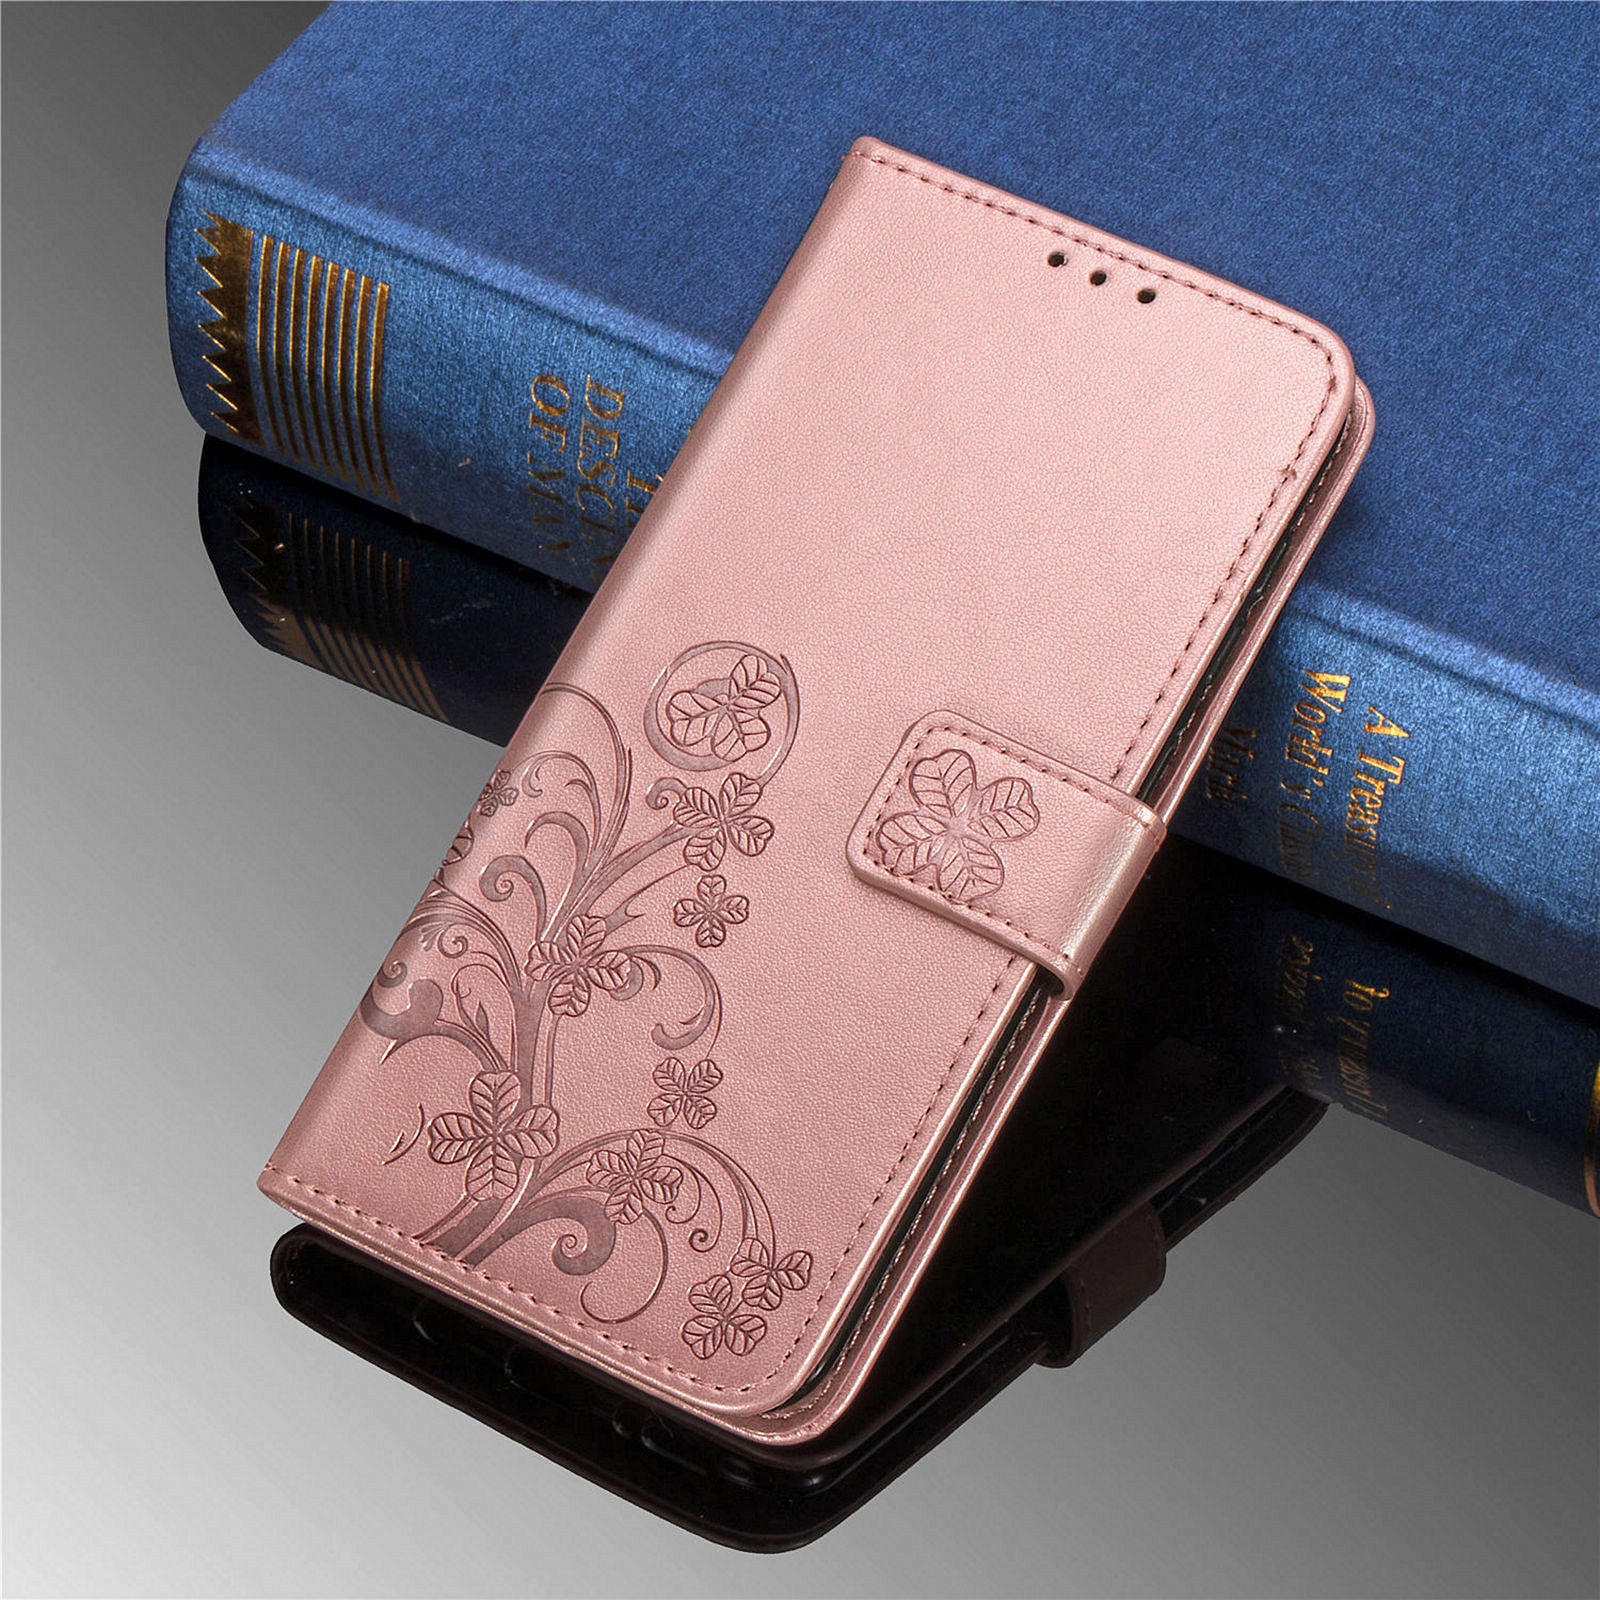 Embossed 3D Flower Case for Samsung Galaxy Z Fold 4 Fold 3 Leather Wallet Phone Case Bag Cover - 0 For Galaxy Z Fold 3 / Rose Gold / United States Find Epic Store